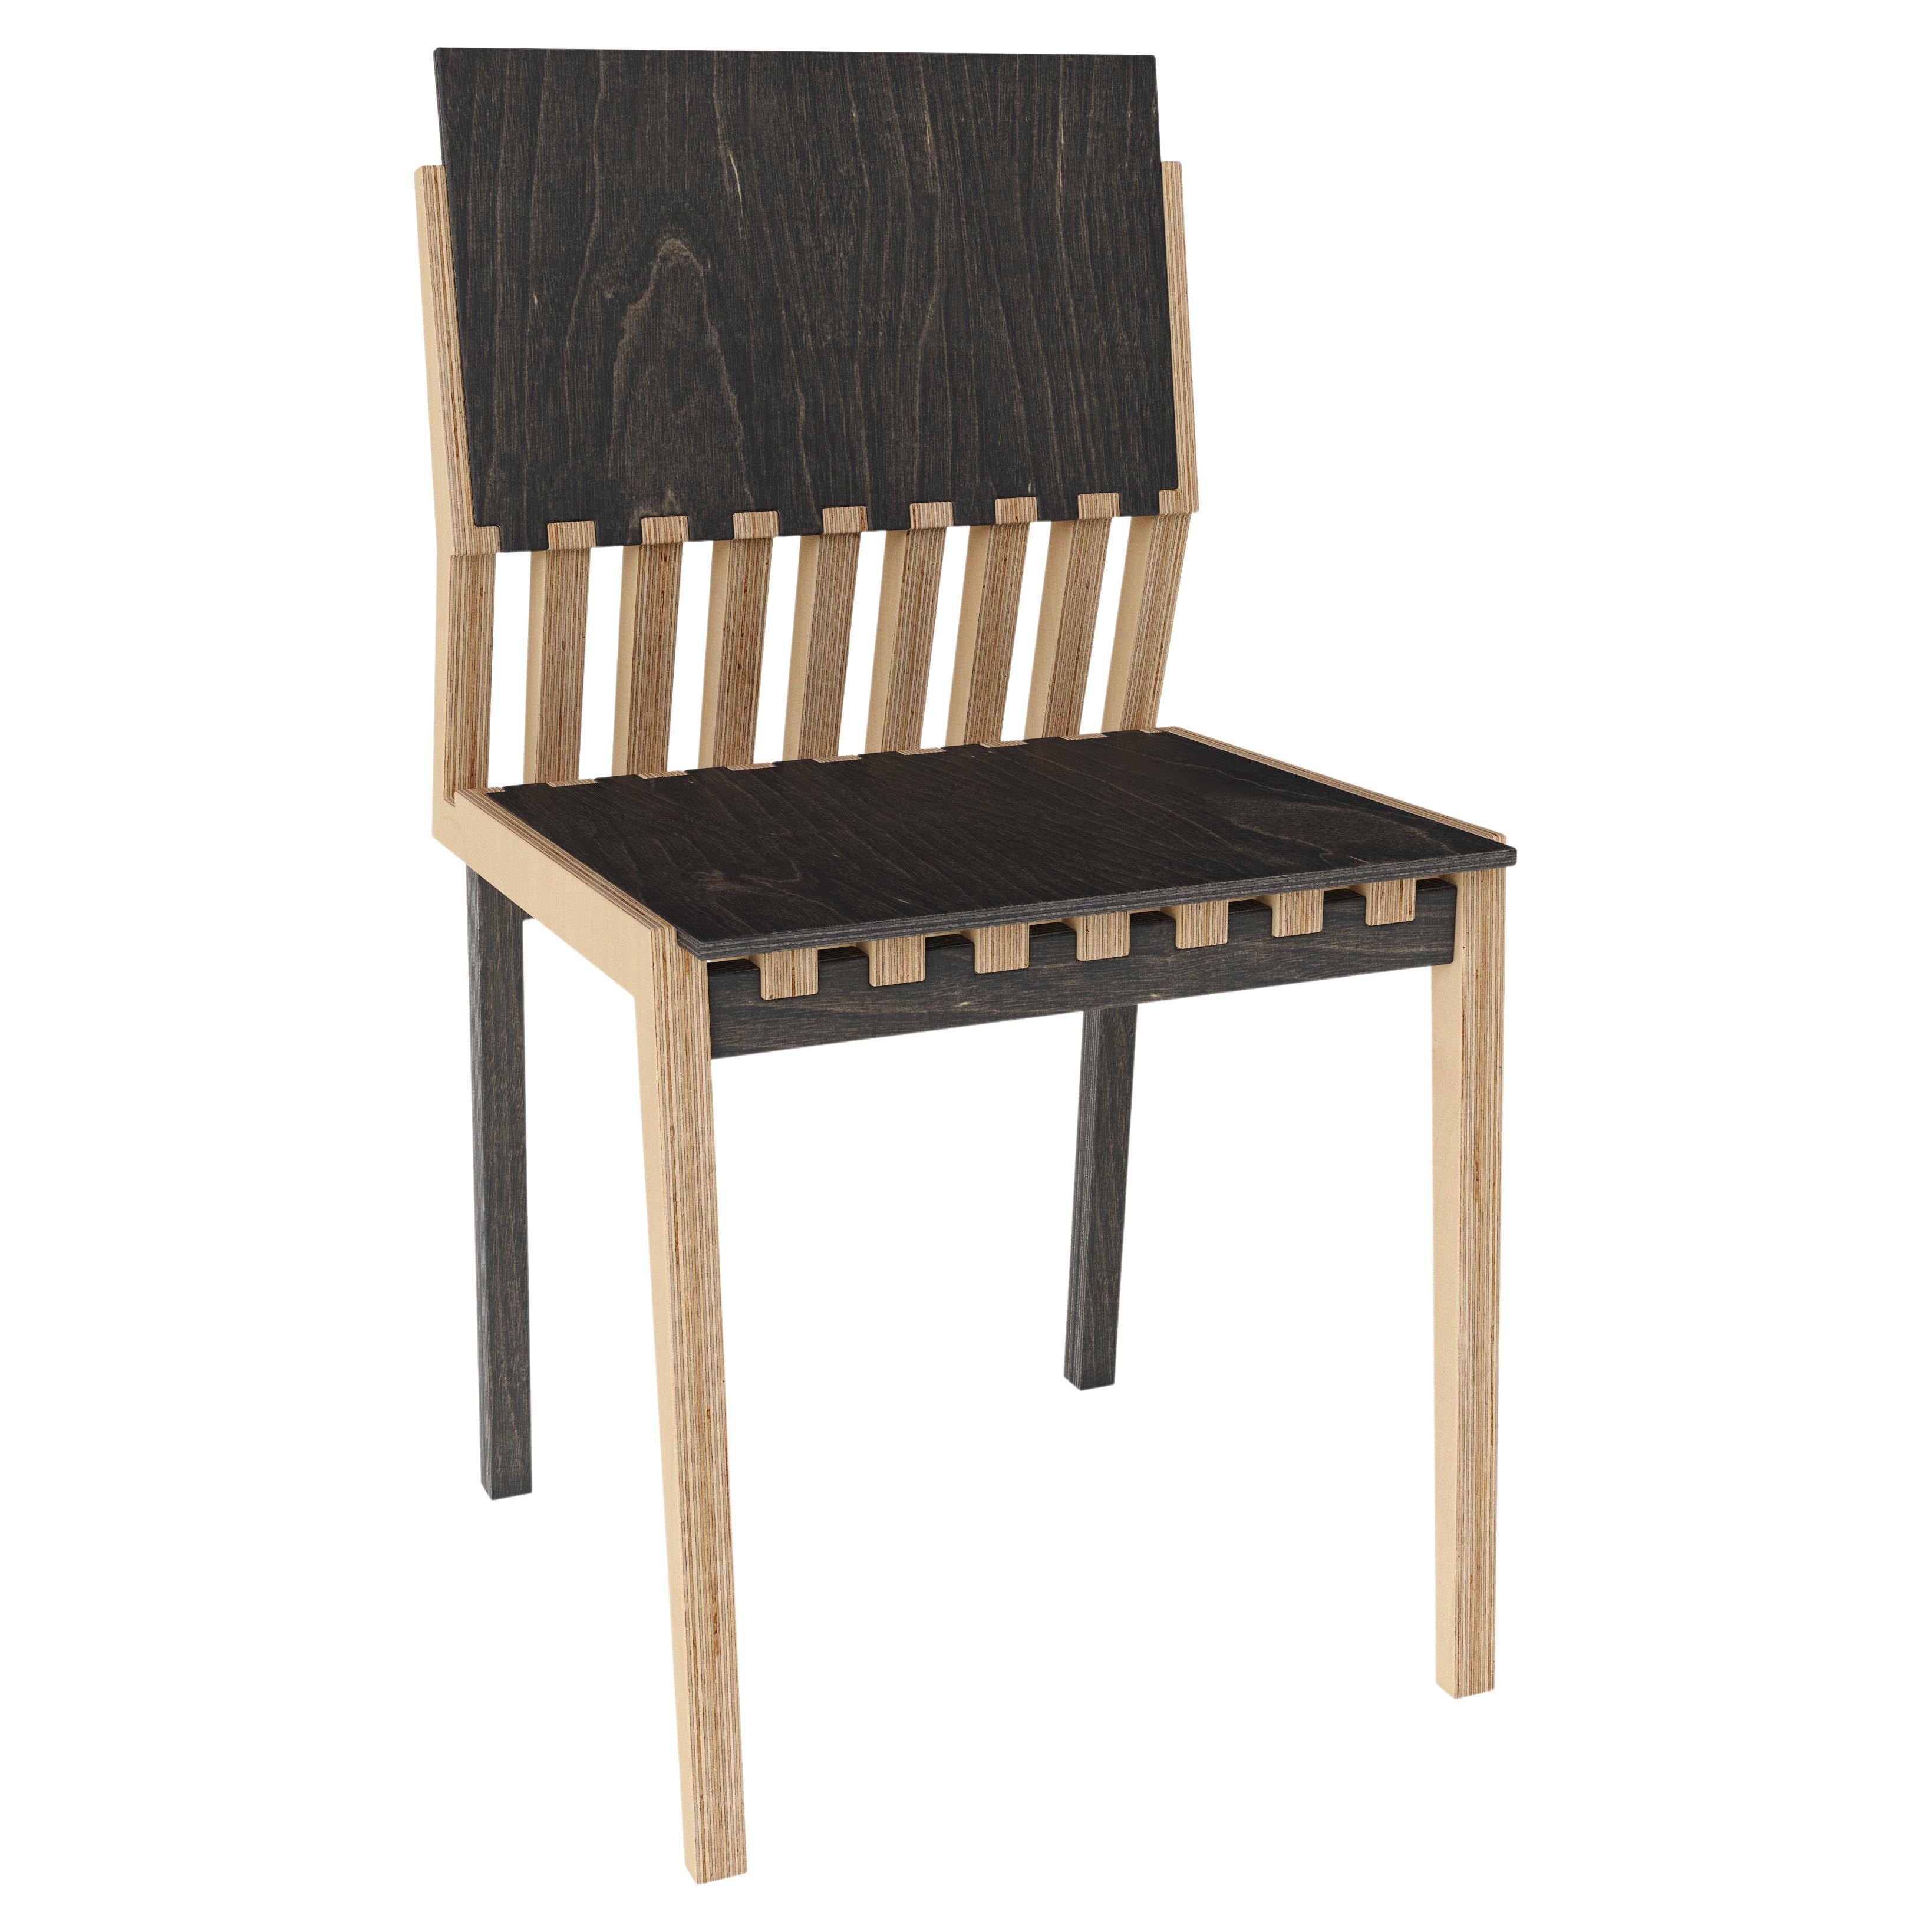 Dynamic lines and contrasting colors represent Coast wild cliffs. At the same time  this chair features minimalistic architectural lines and functionality, both ruled by the Nordic design. This international symbiosis is characteristic of our motto.